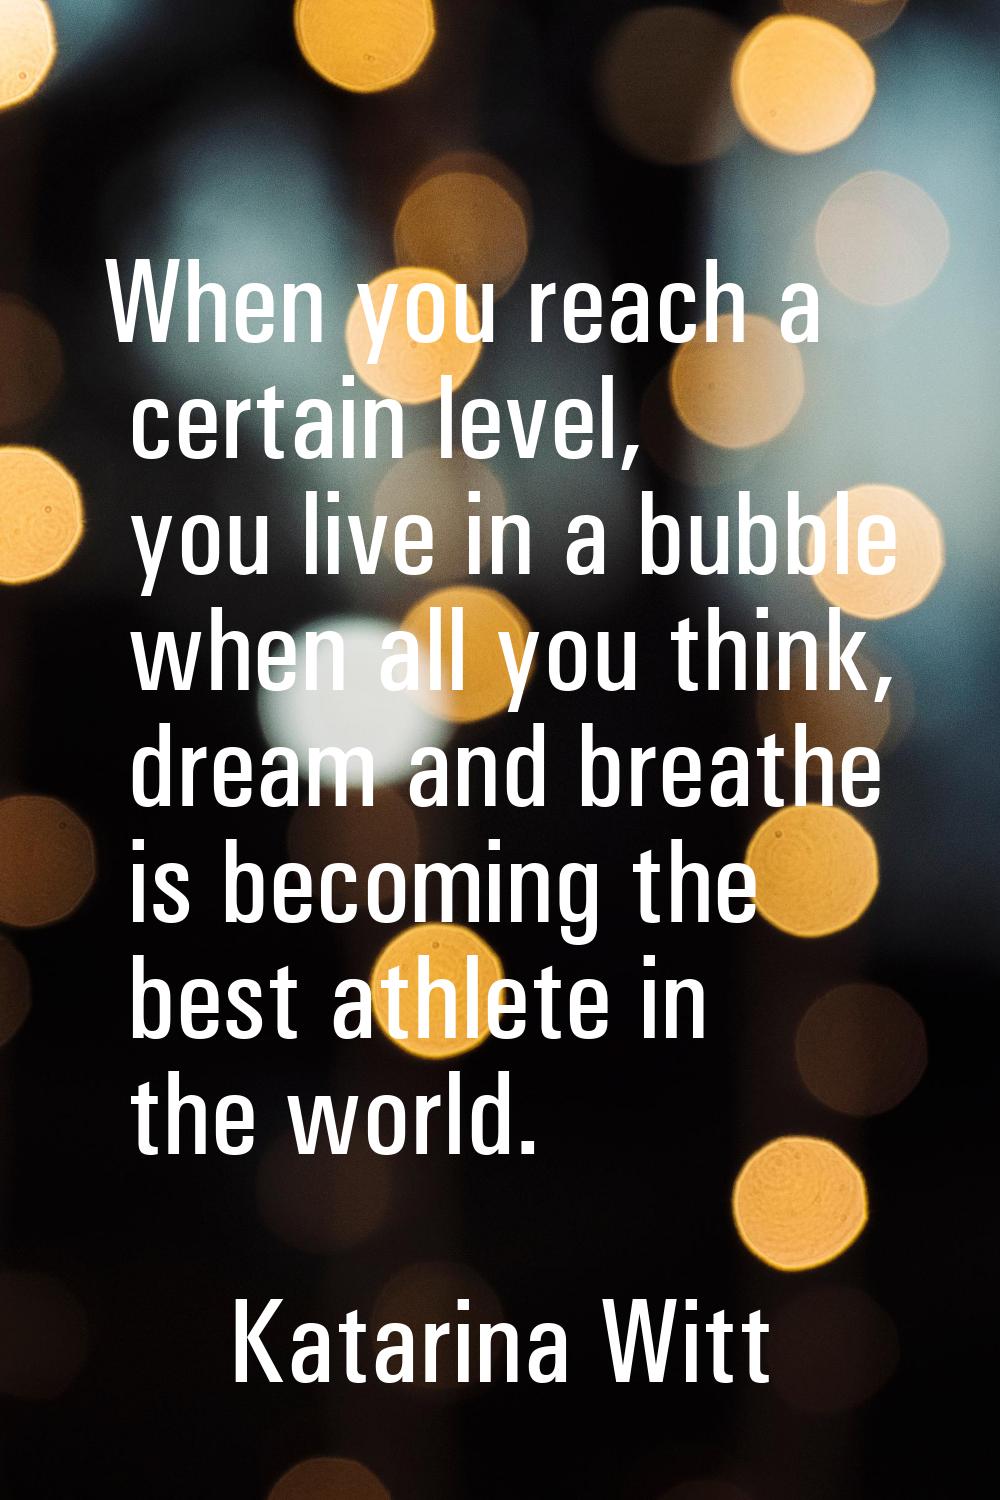 When you reach a certain level, you live in a bubble when all you think, dream and breathe is becom